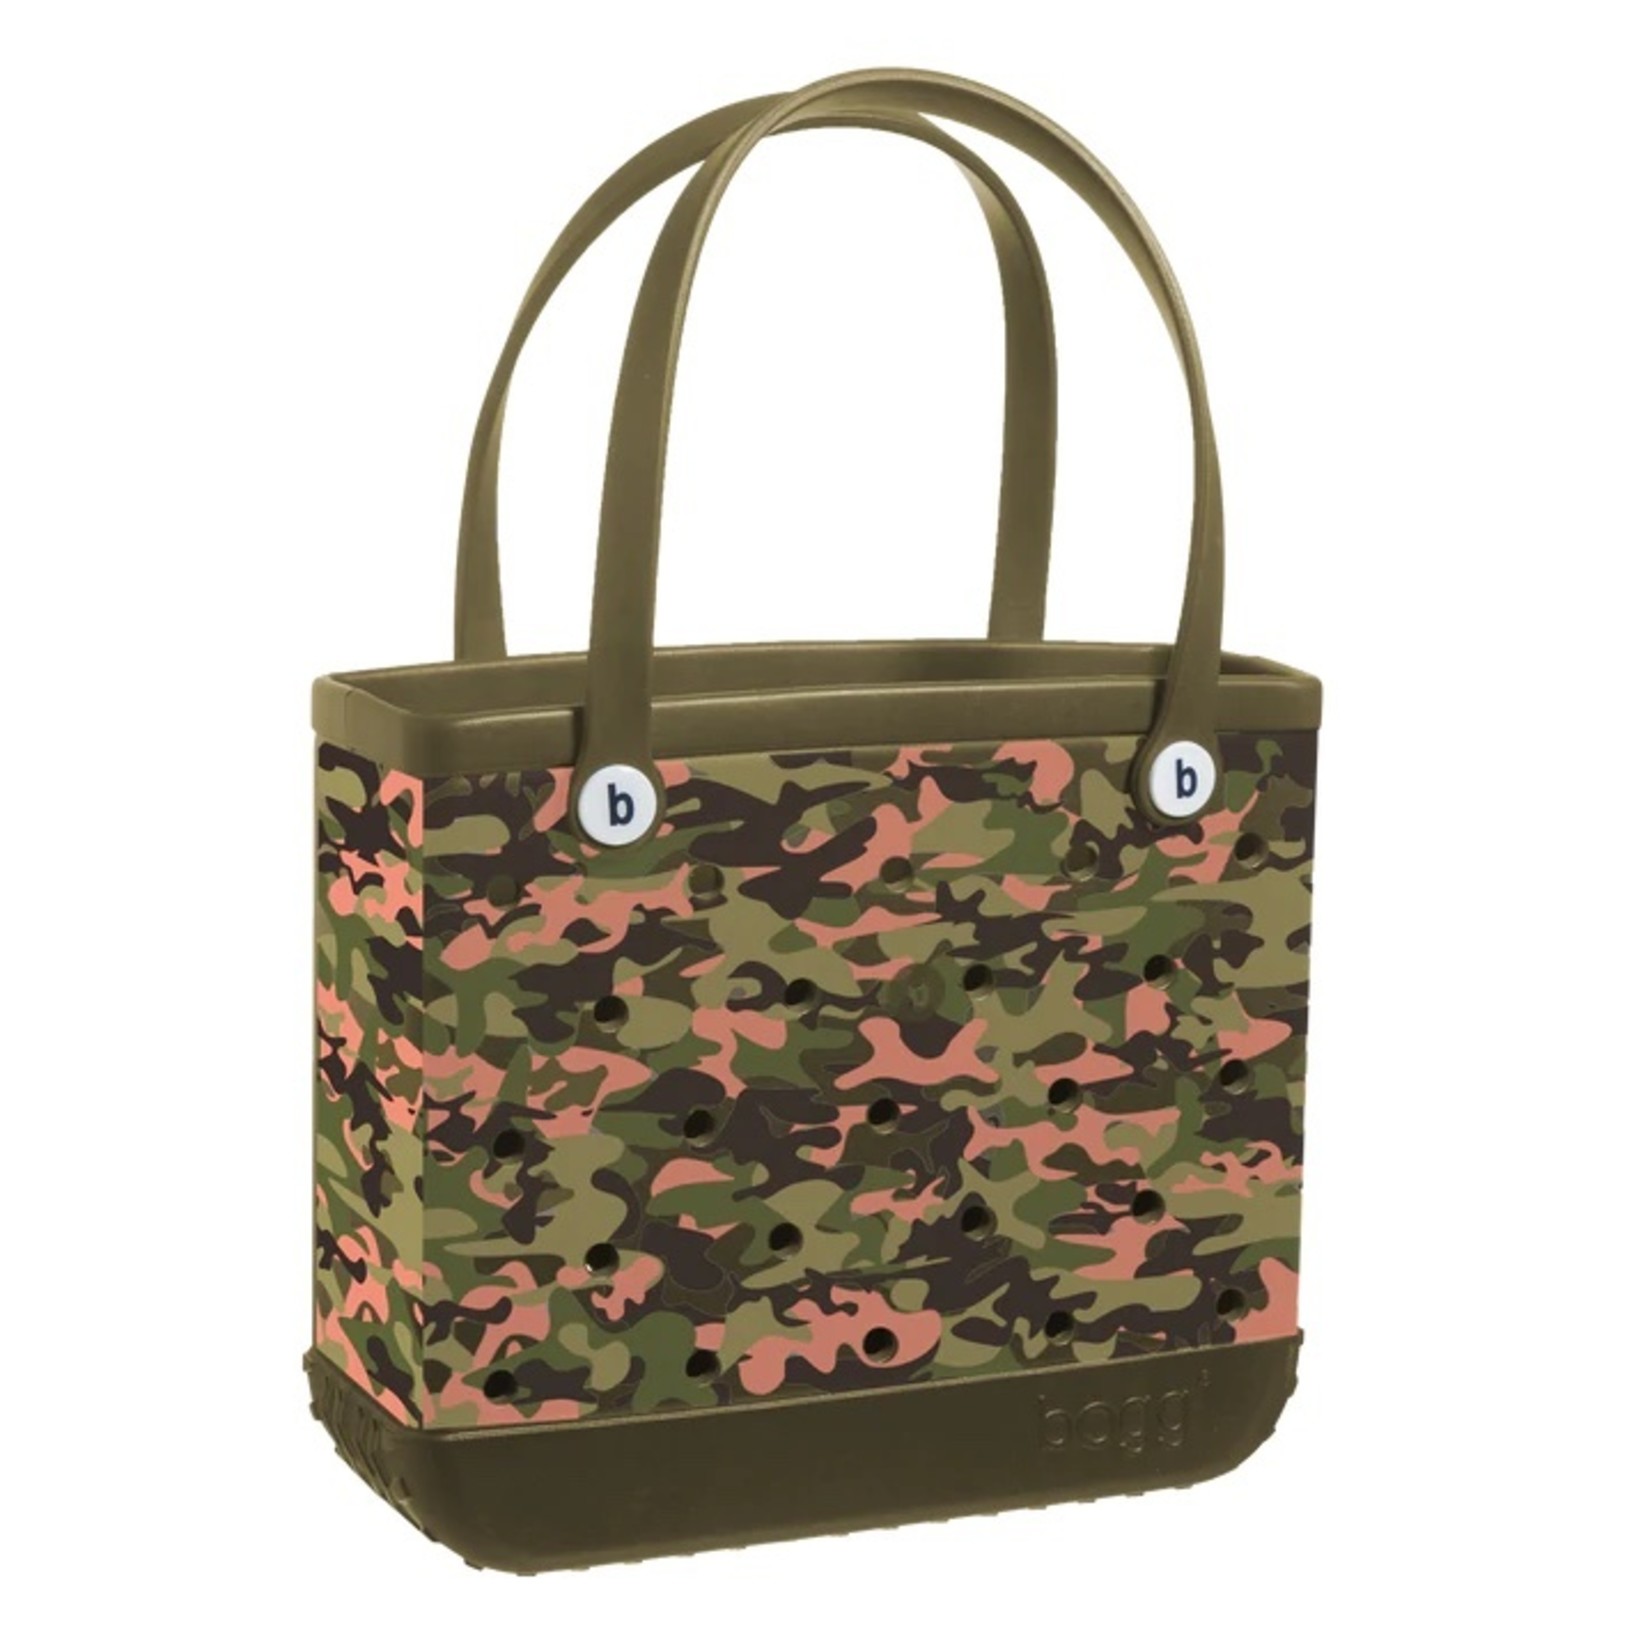 Bogg Bags Camo Baby Bogg Tote